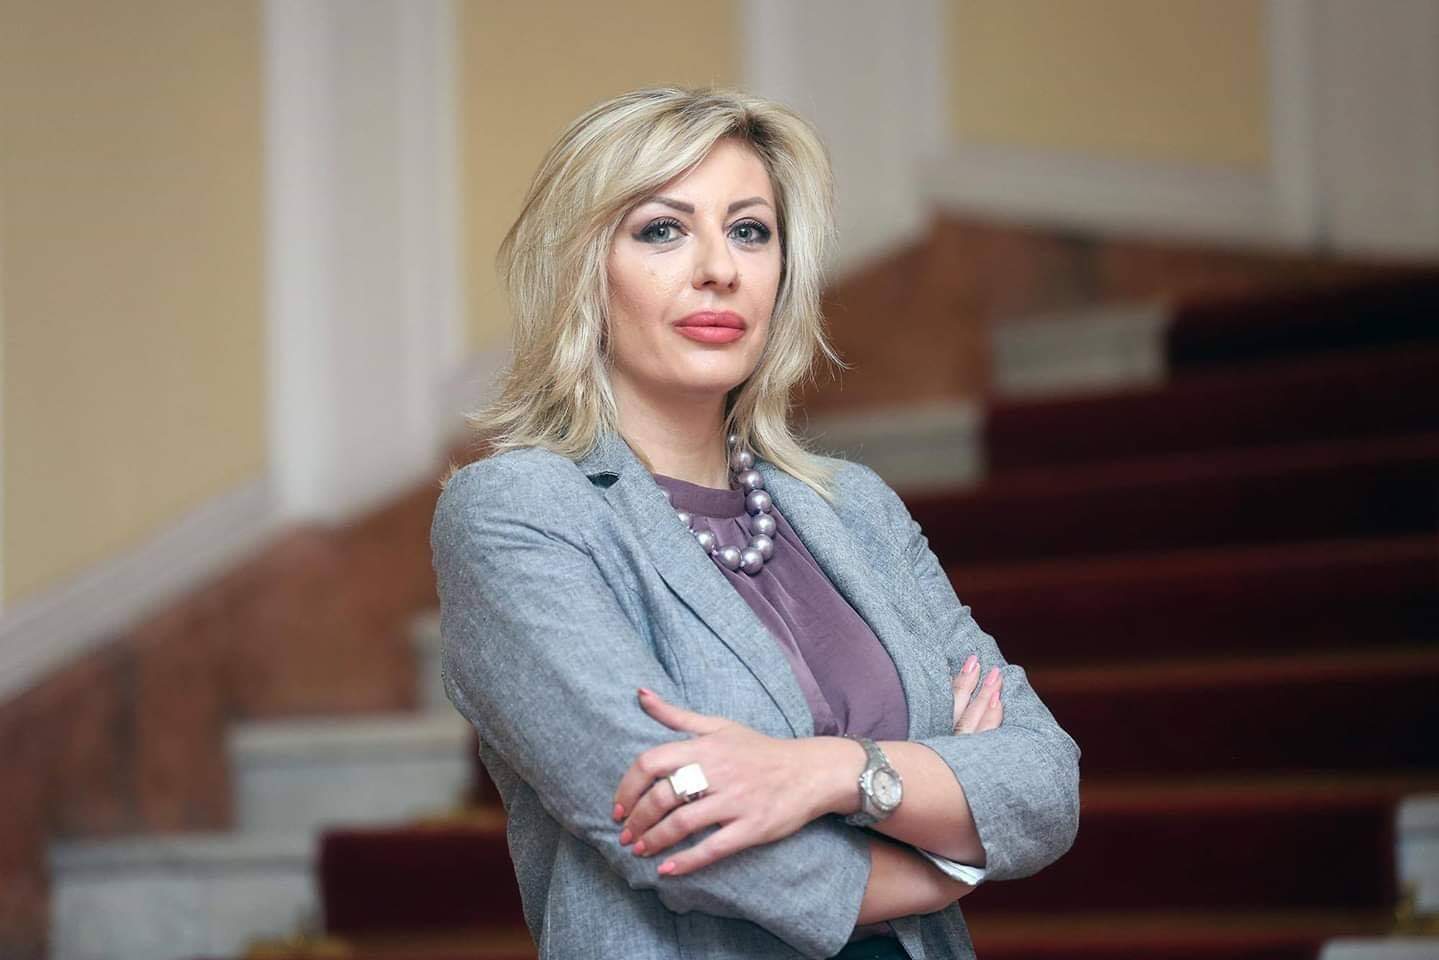 J. Joksimović: Building a solidary, responsible and resilient Europe together